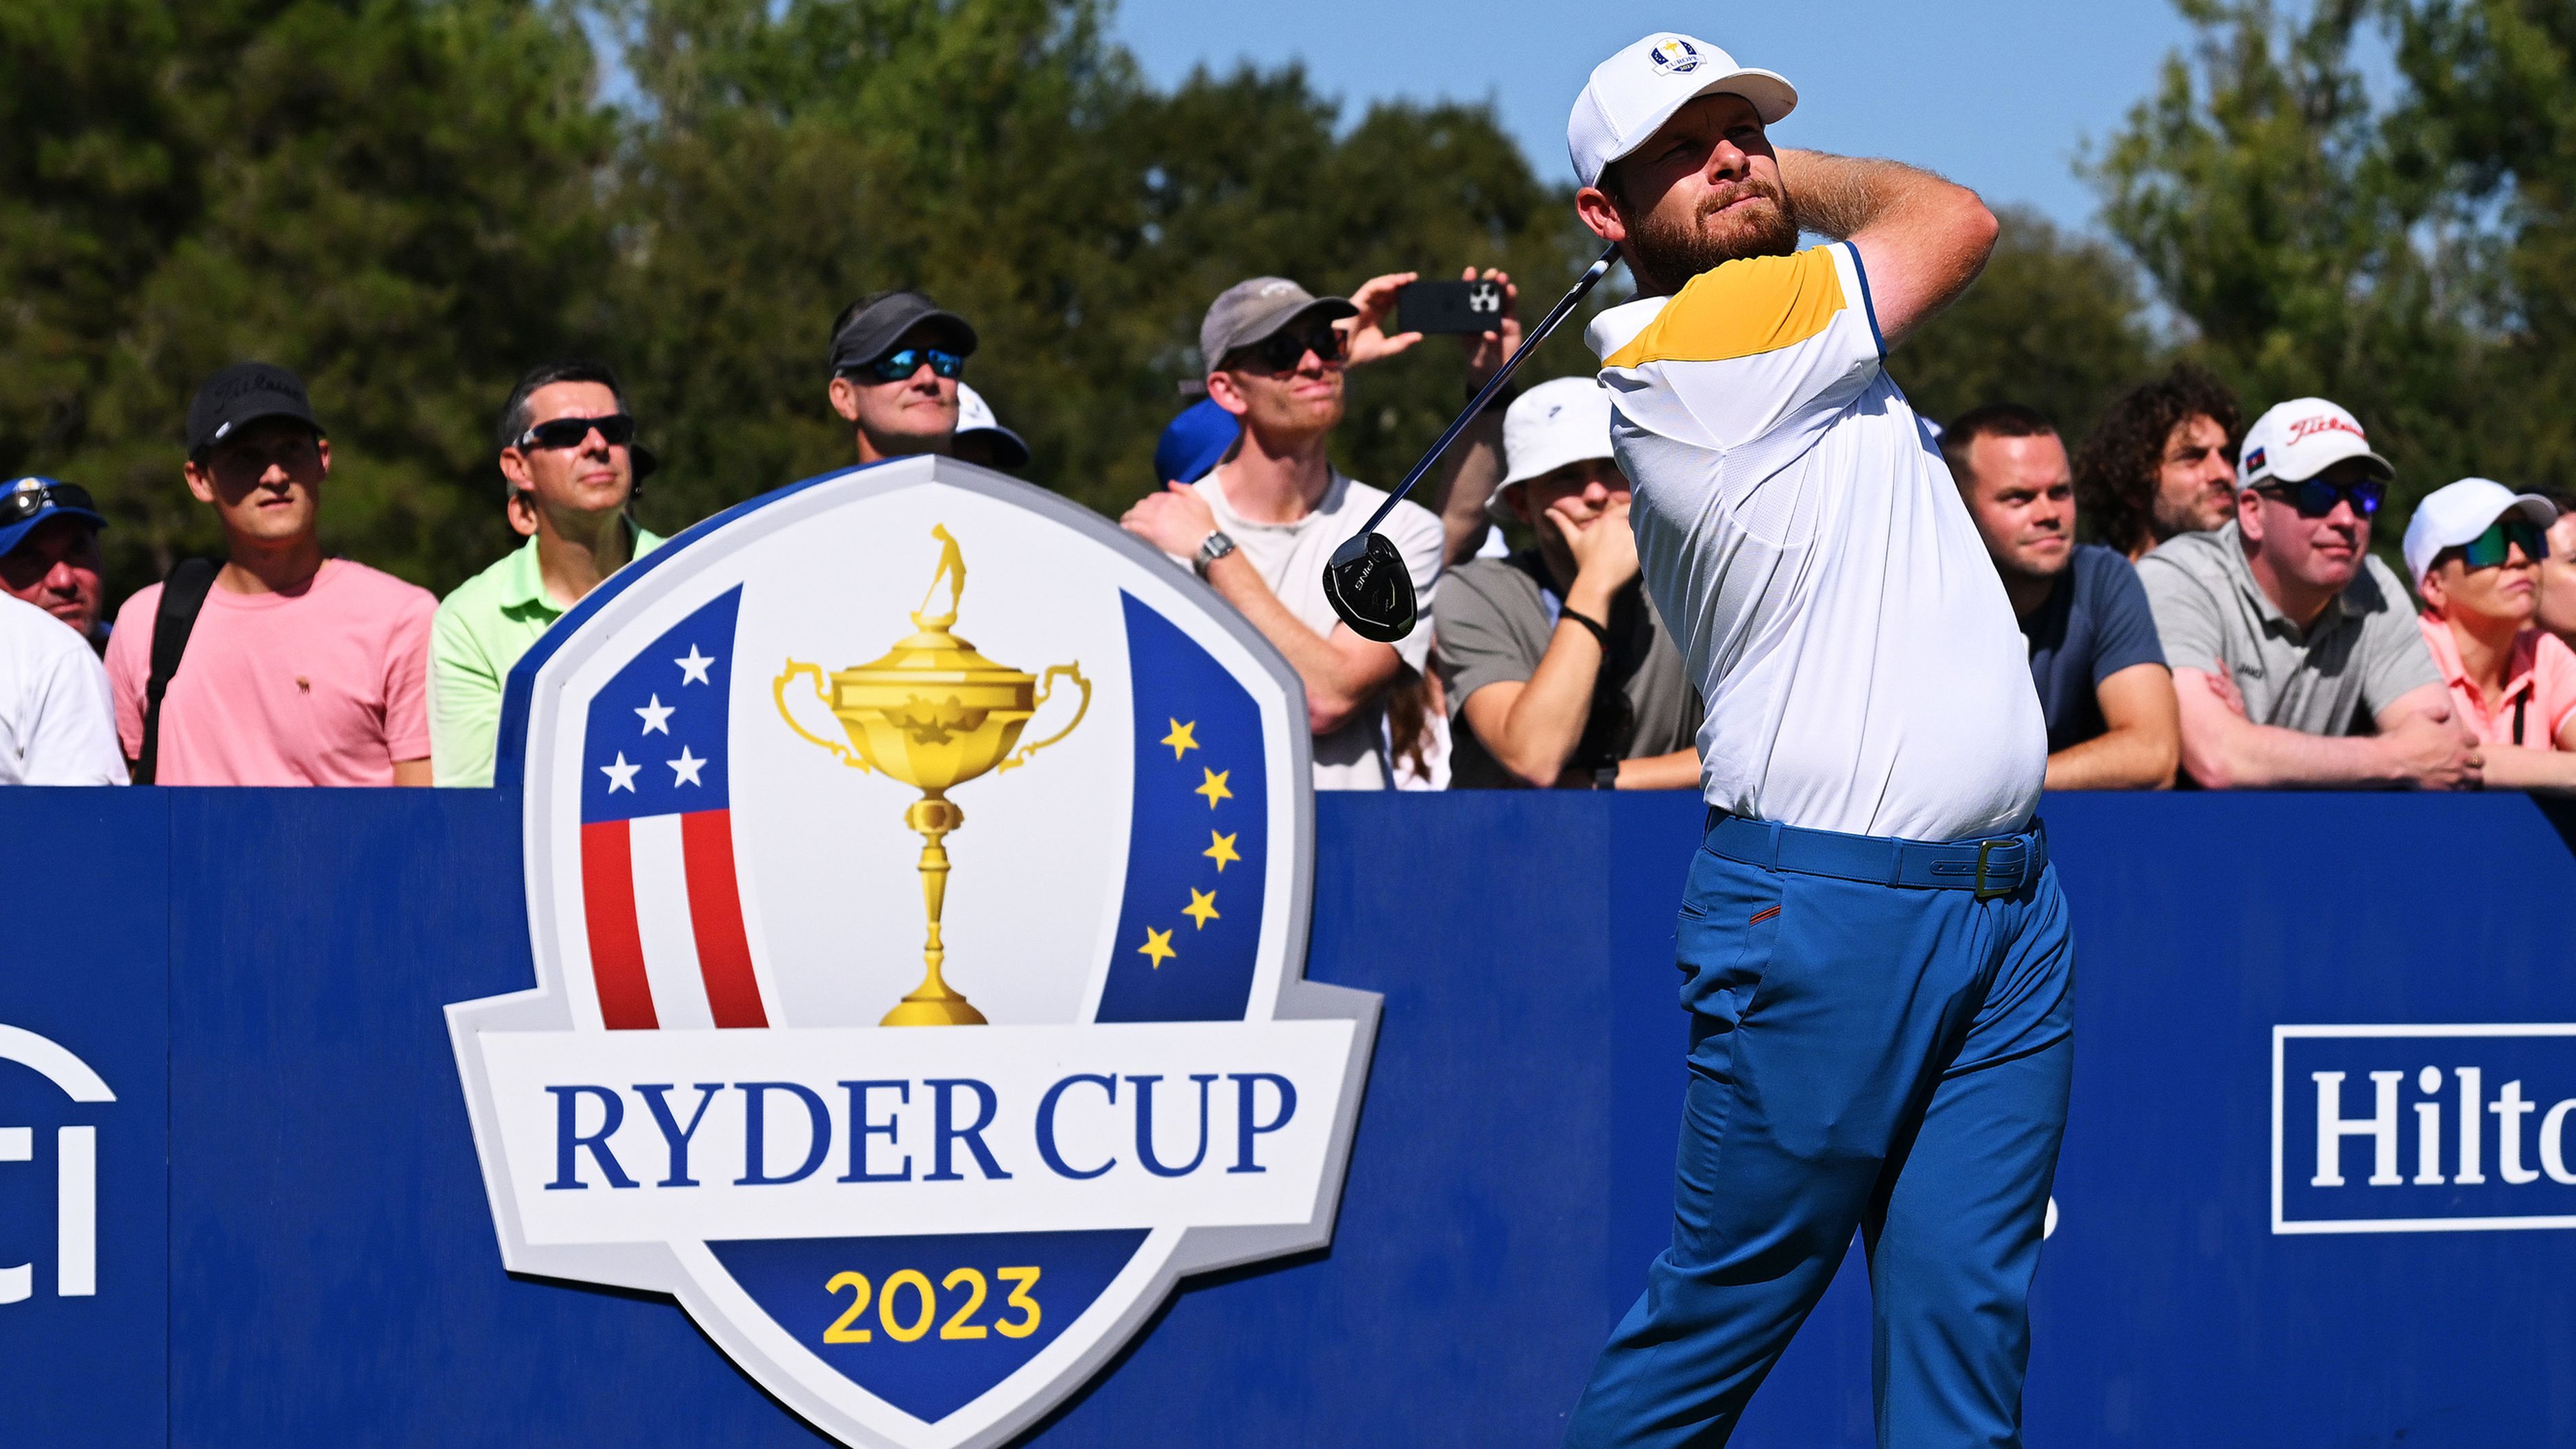 Star pleads with Ryder Cup crowds after revealing families abused, players 'spat at'